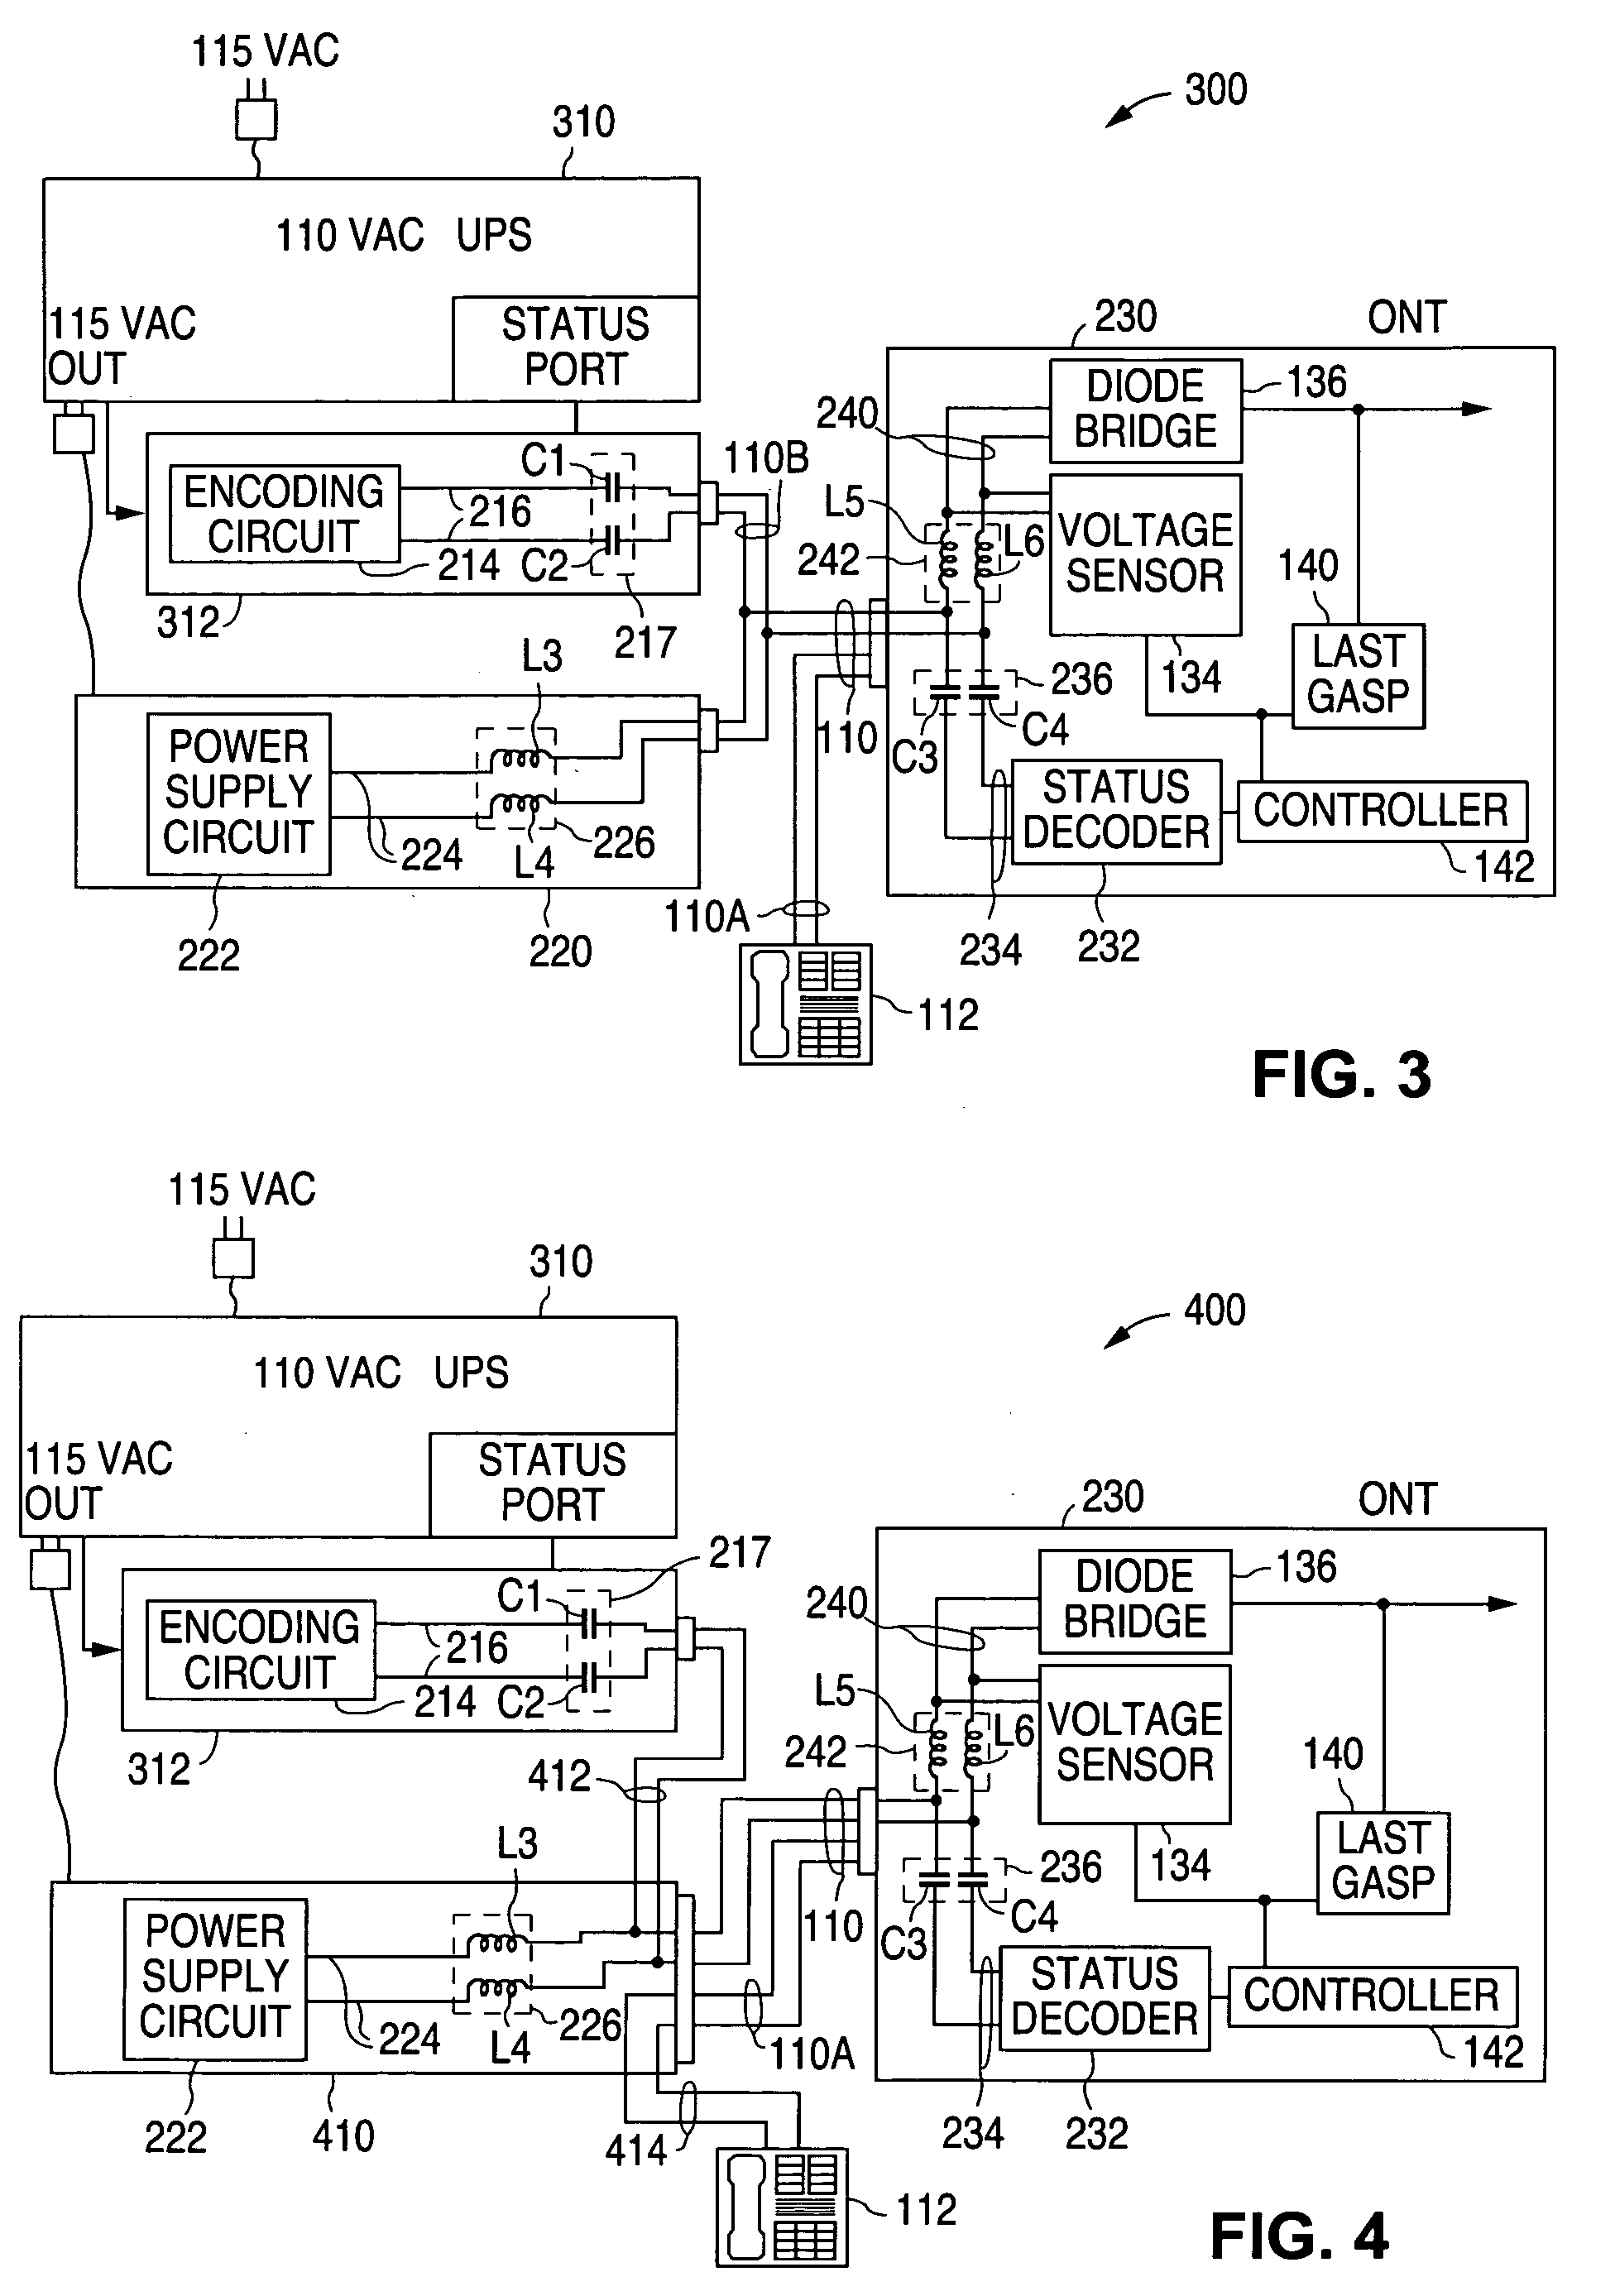 System and method of delivering operating power and power source status signals over a single pair of wires